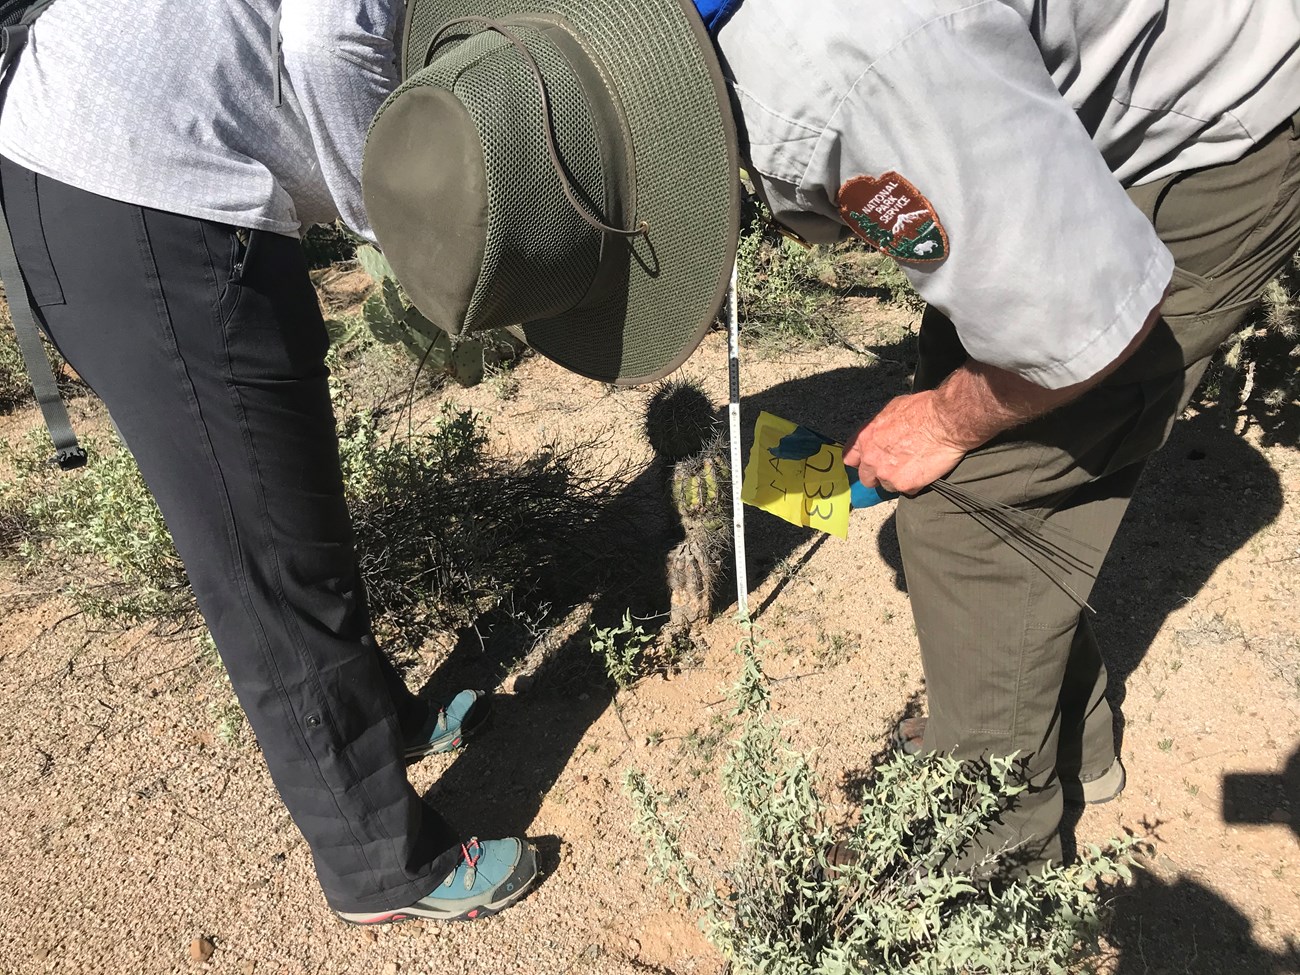 Volunteer crouches to measure small saguaro with meter stick